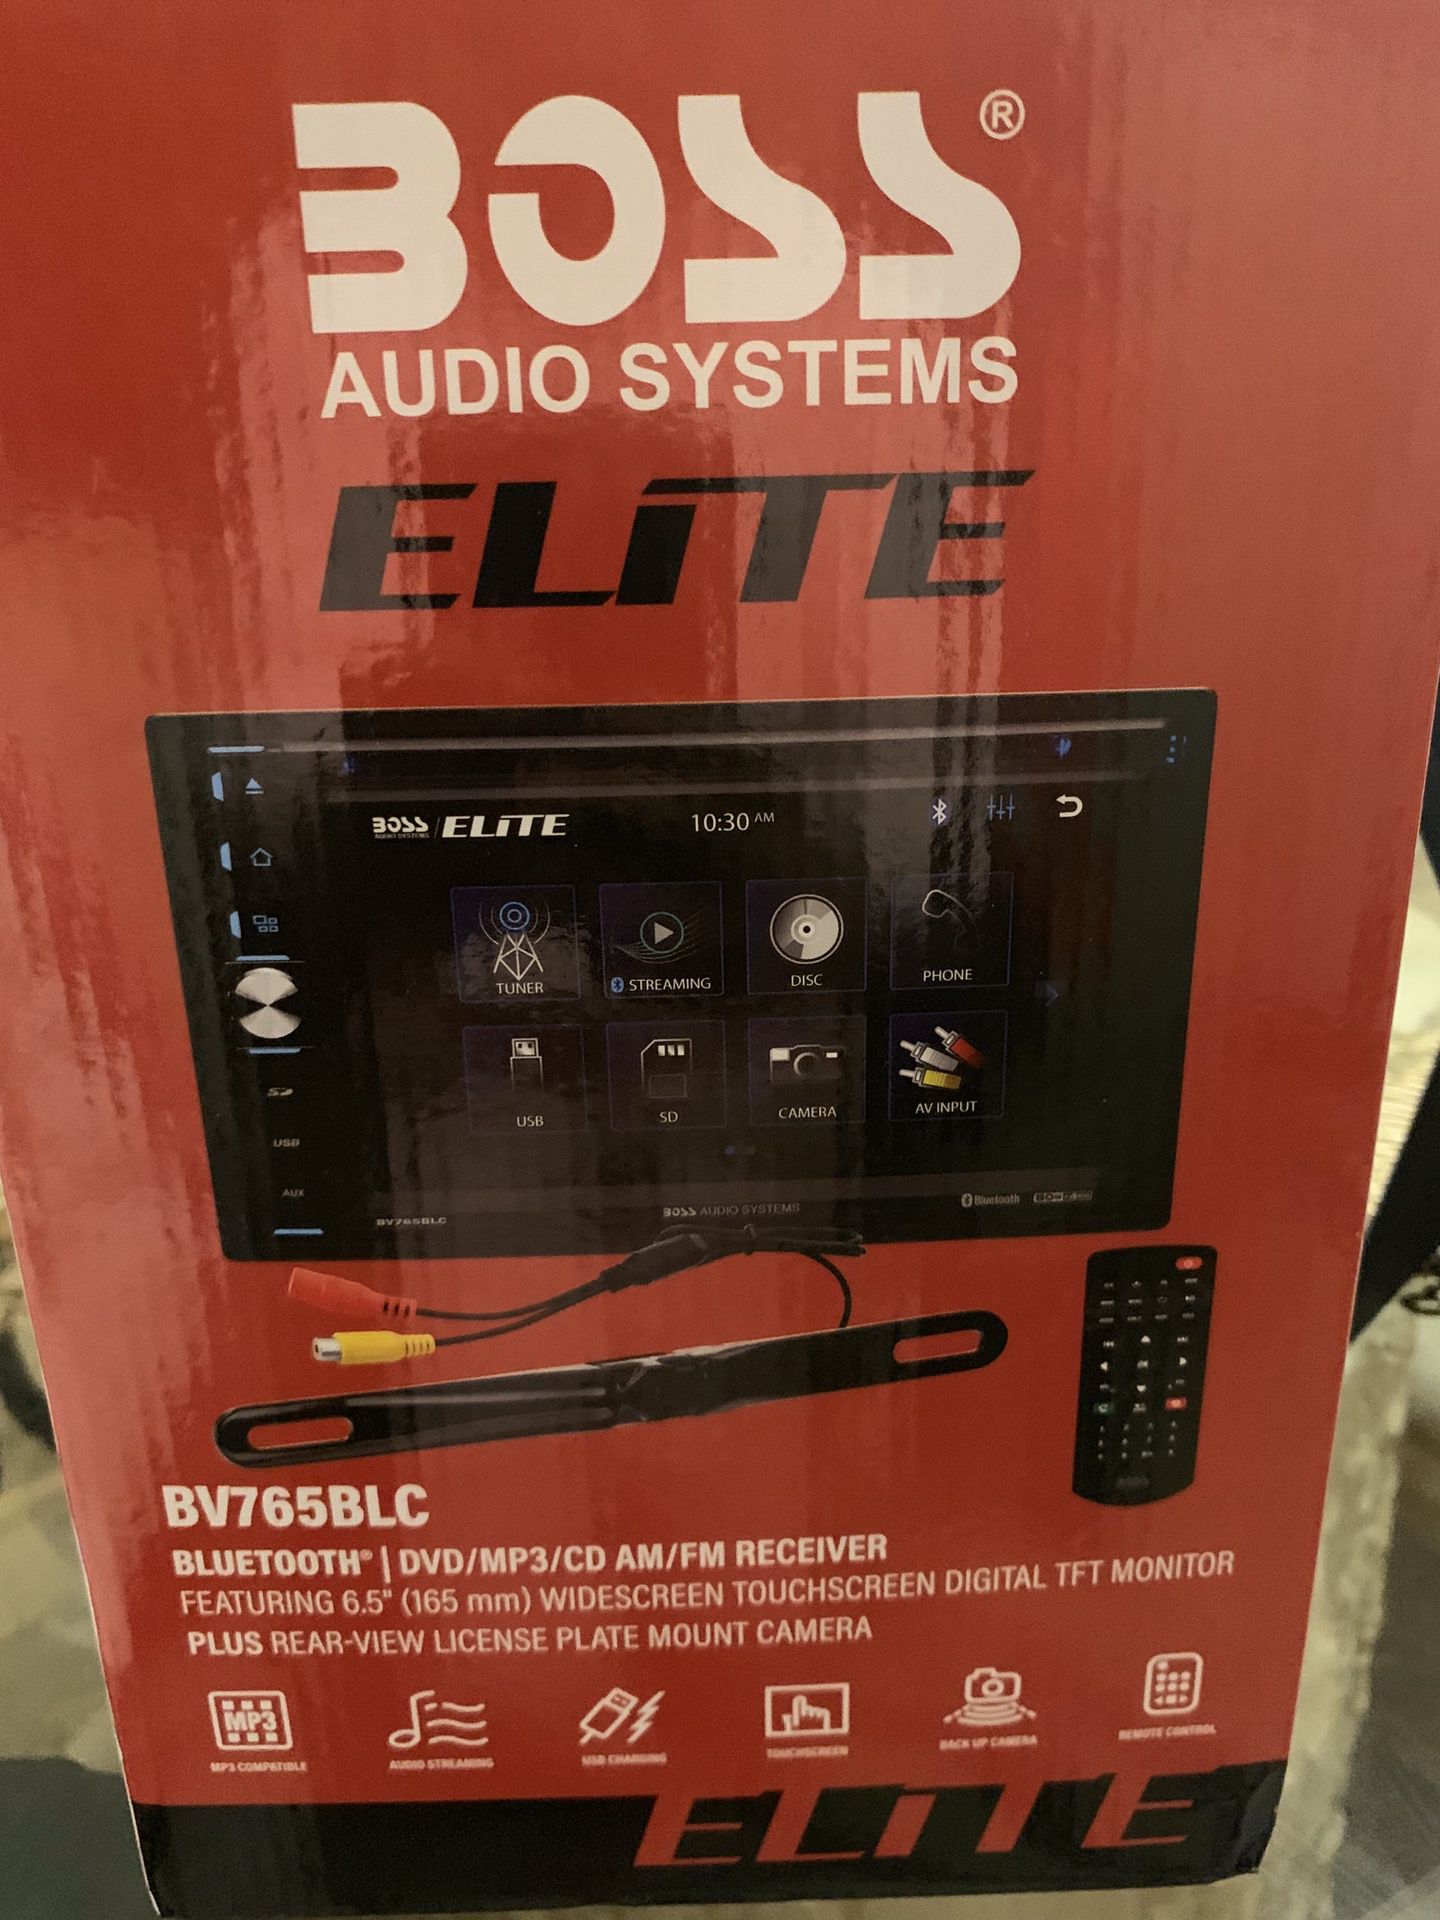 Boss audio systems elite stereo